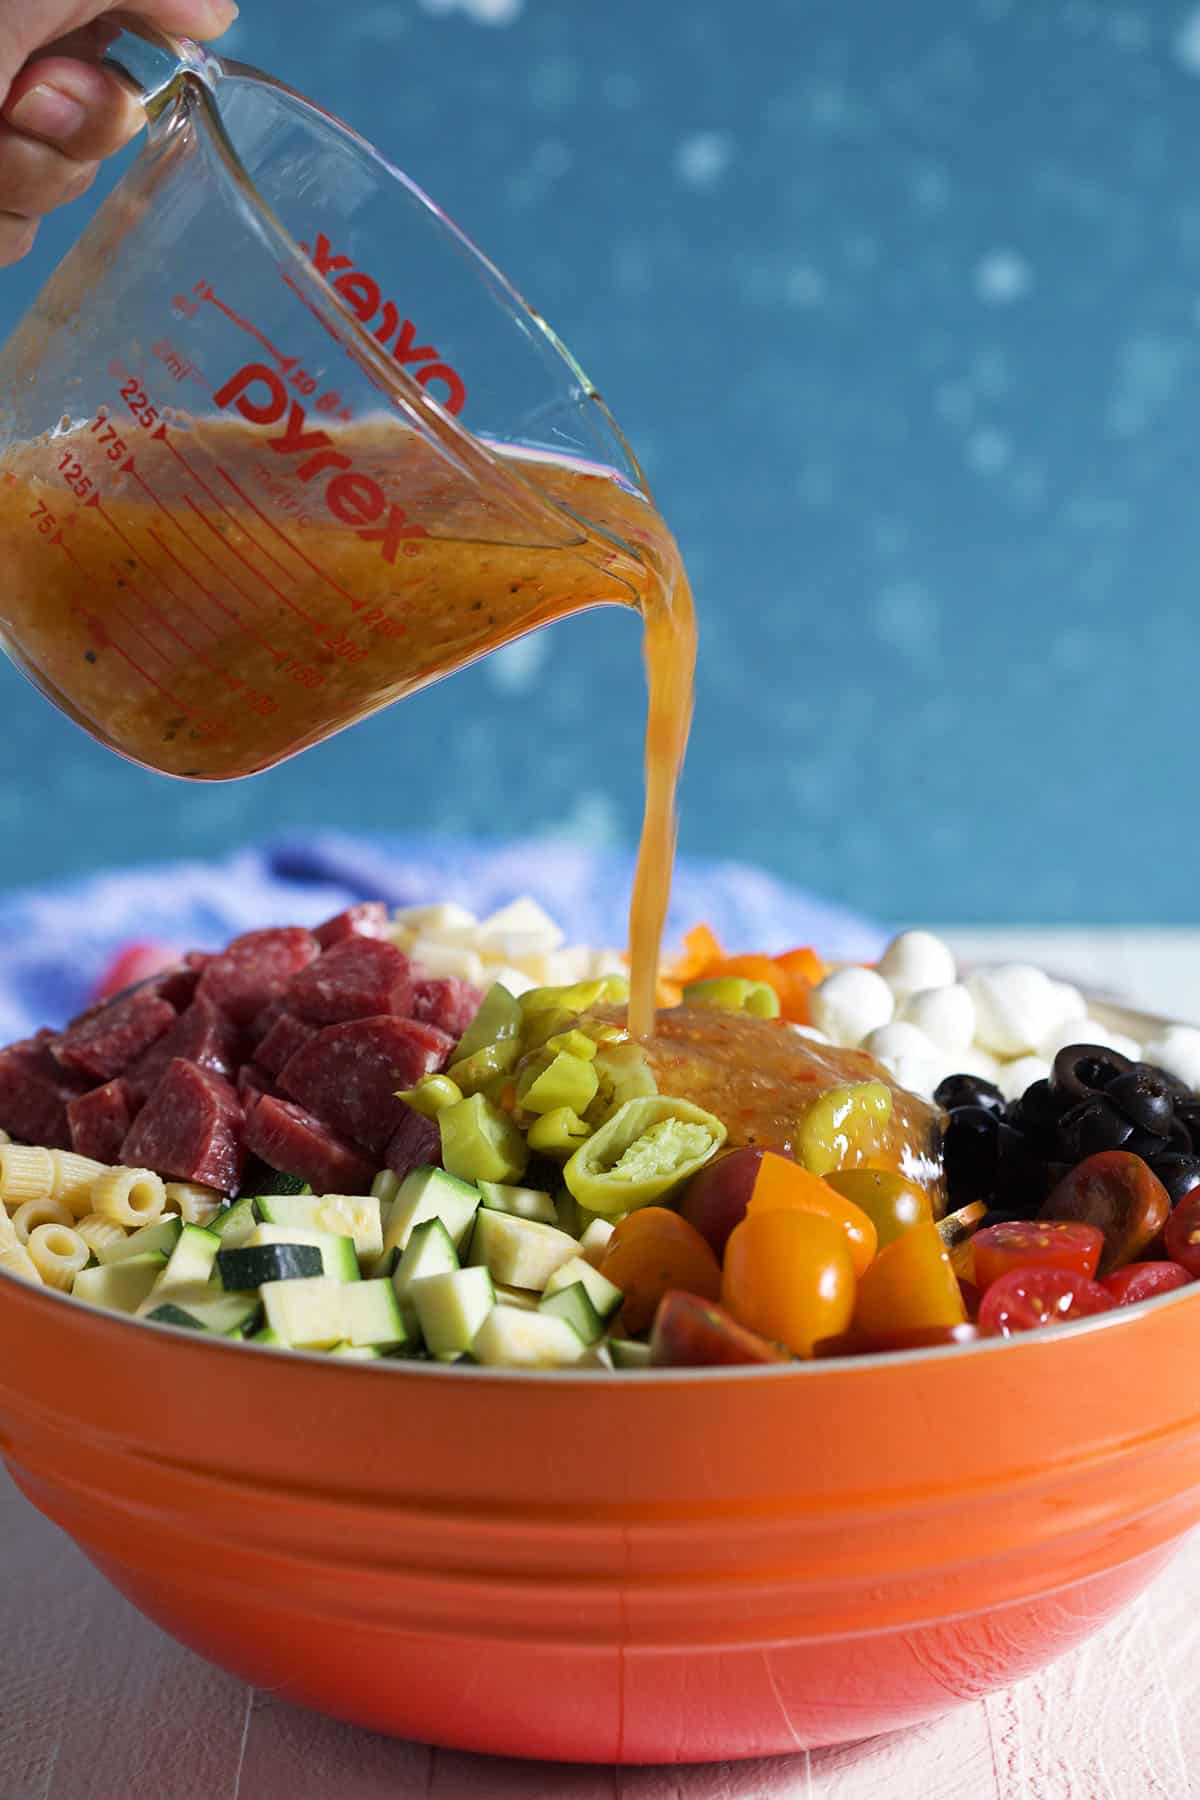 Dressing being poured over Italian pasta salad in an orange bowl.